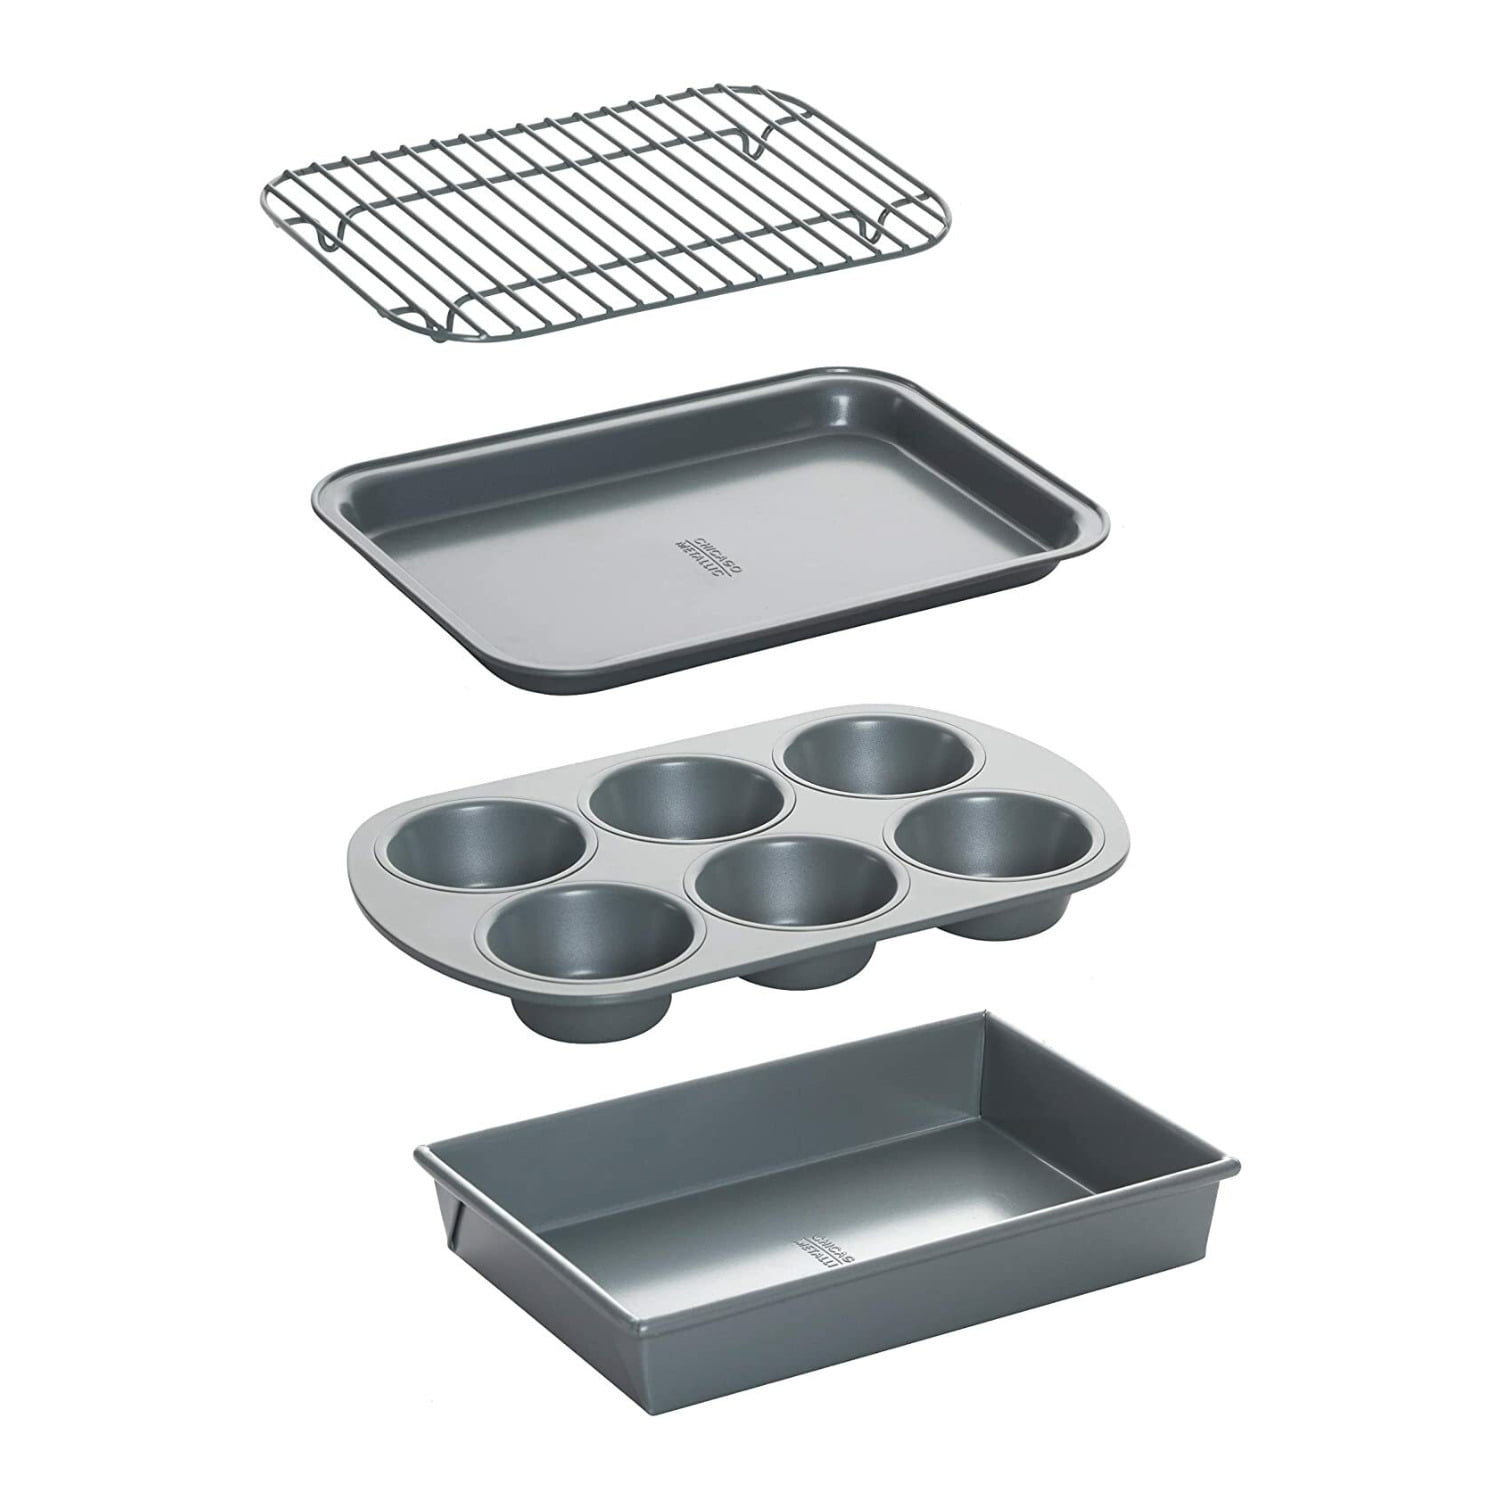 Non-Stick Baking Pans Non-Stick 6-Piece Toaster Oven Baking Pan Set 0 1-6-Piece Easy to Clean and Perfect for Single Servings